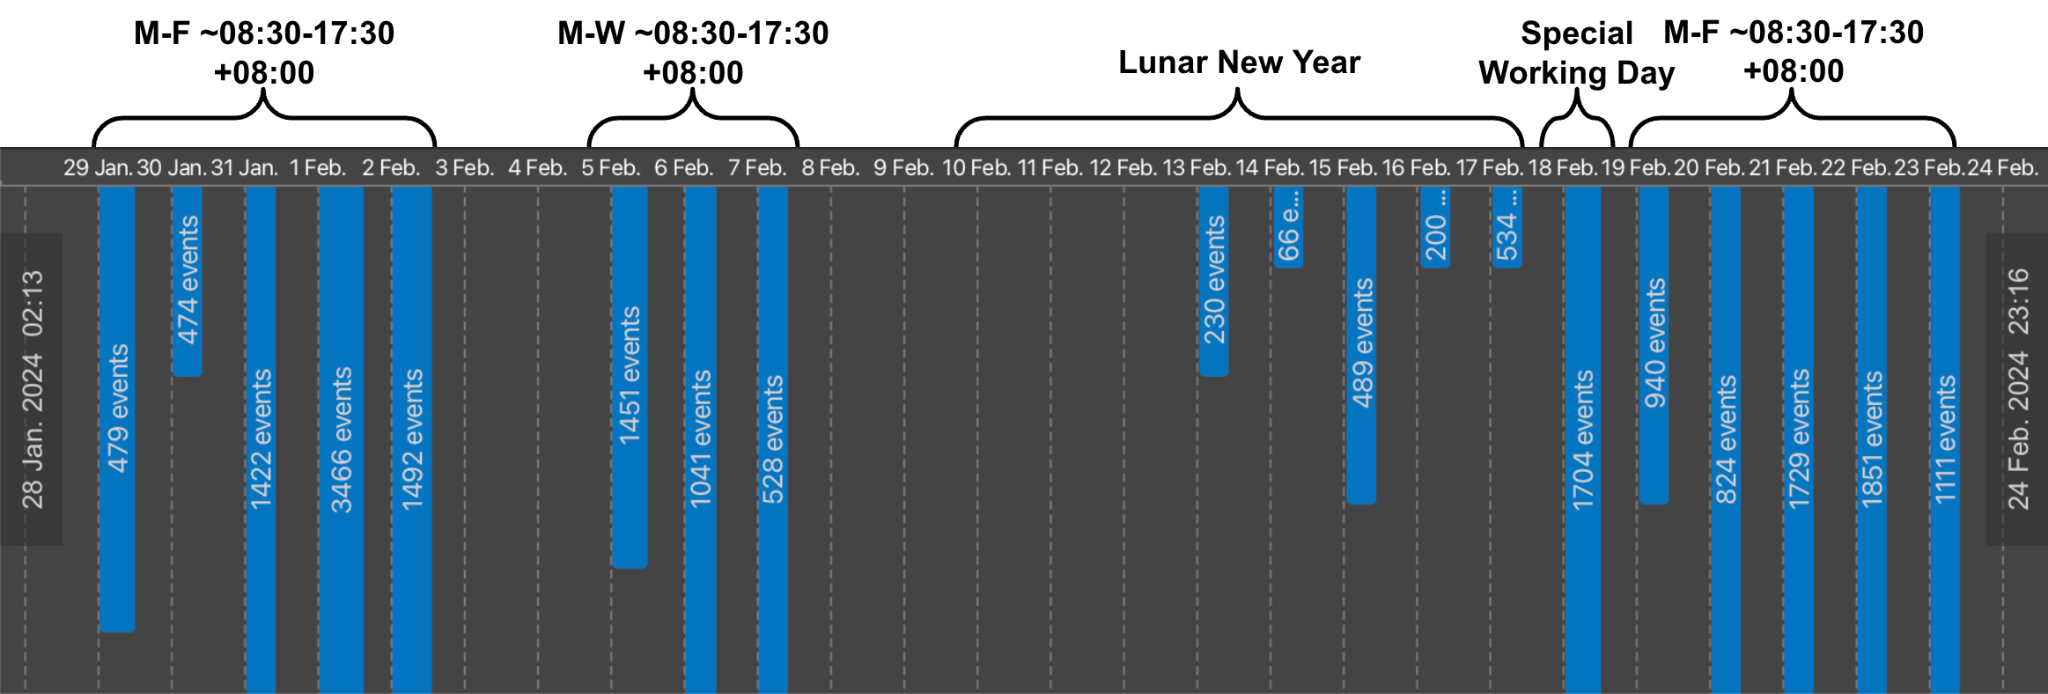 Image 2 is a timeline of the working days observed identifying the threat actor from the end of January to the end of February. The threat actors are active Monday through Friday, do not work much during the Lunar New Year or the Special Working Day, and then resume activity. Times are in China Standard Time. 